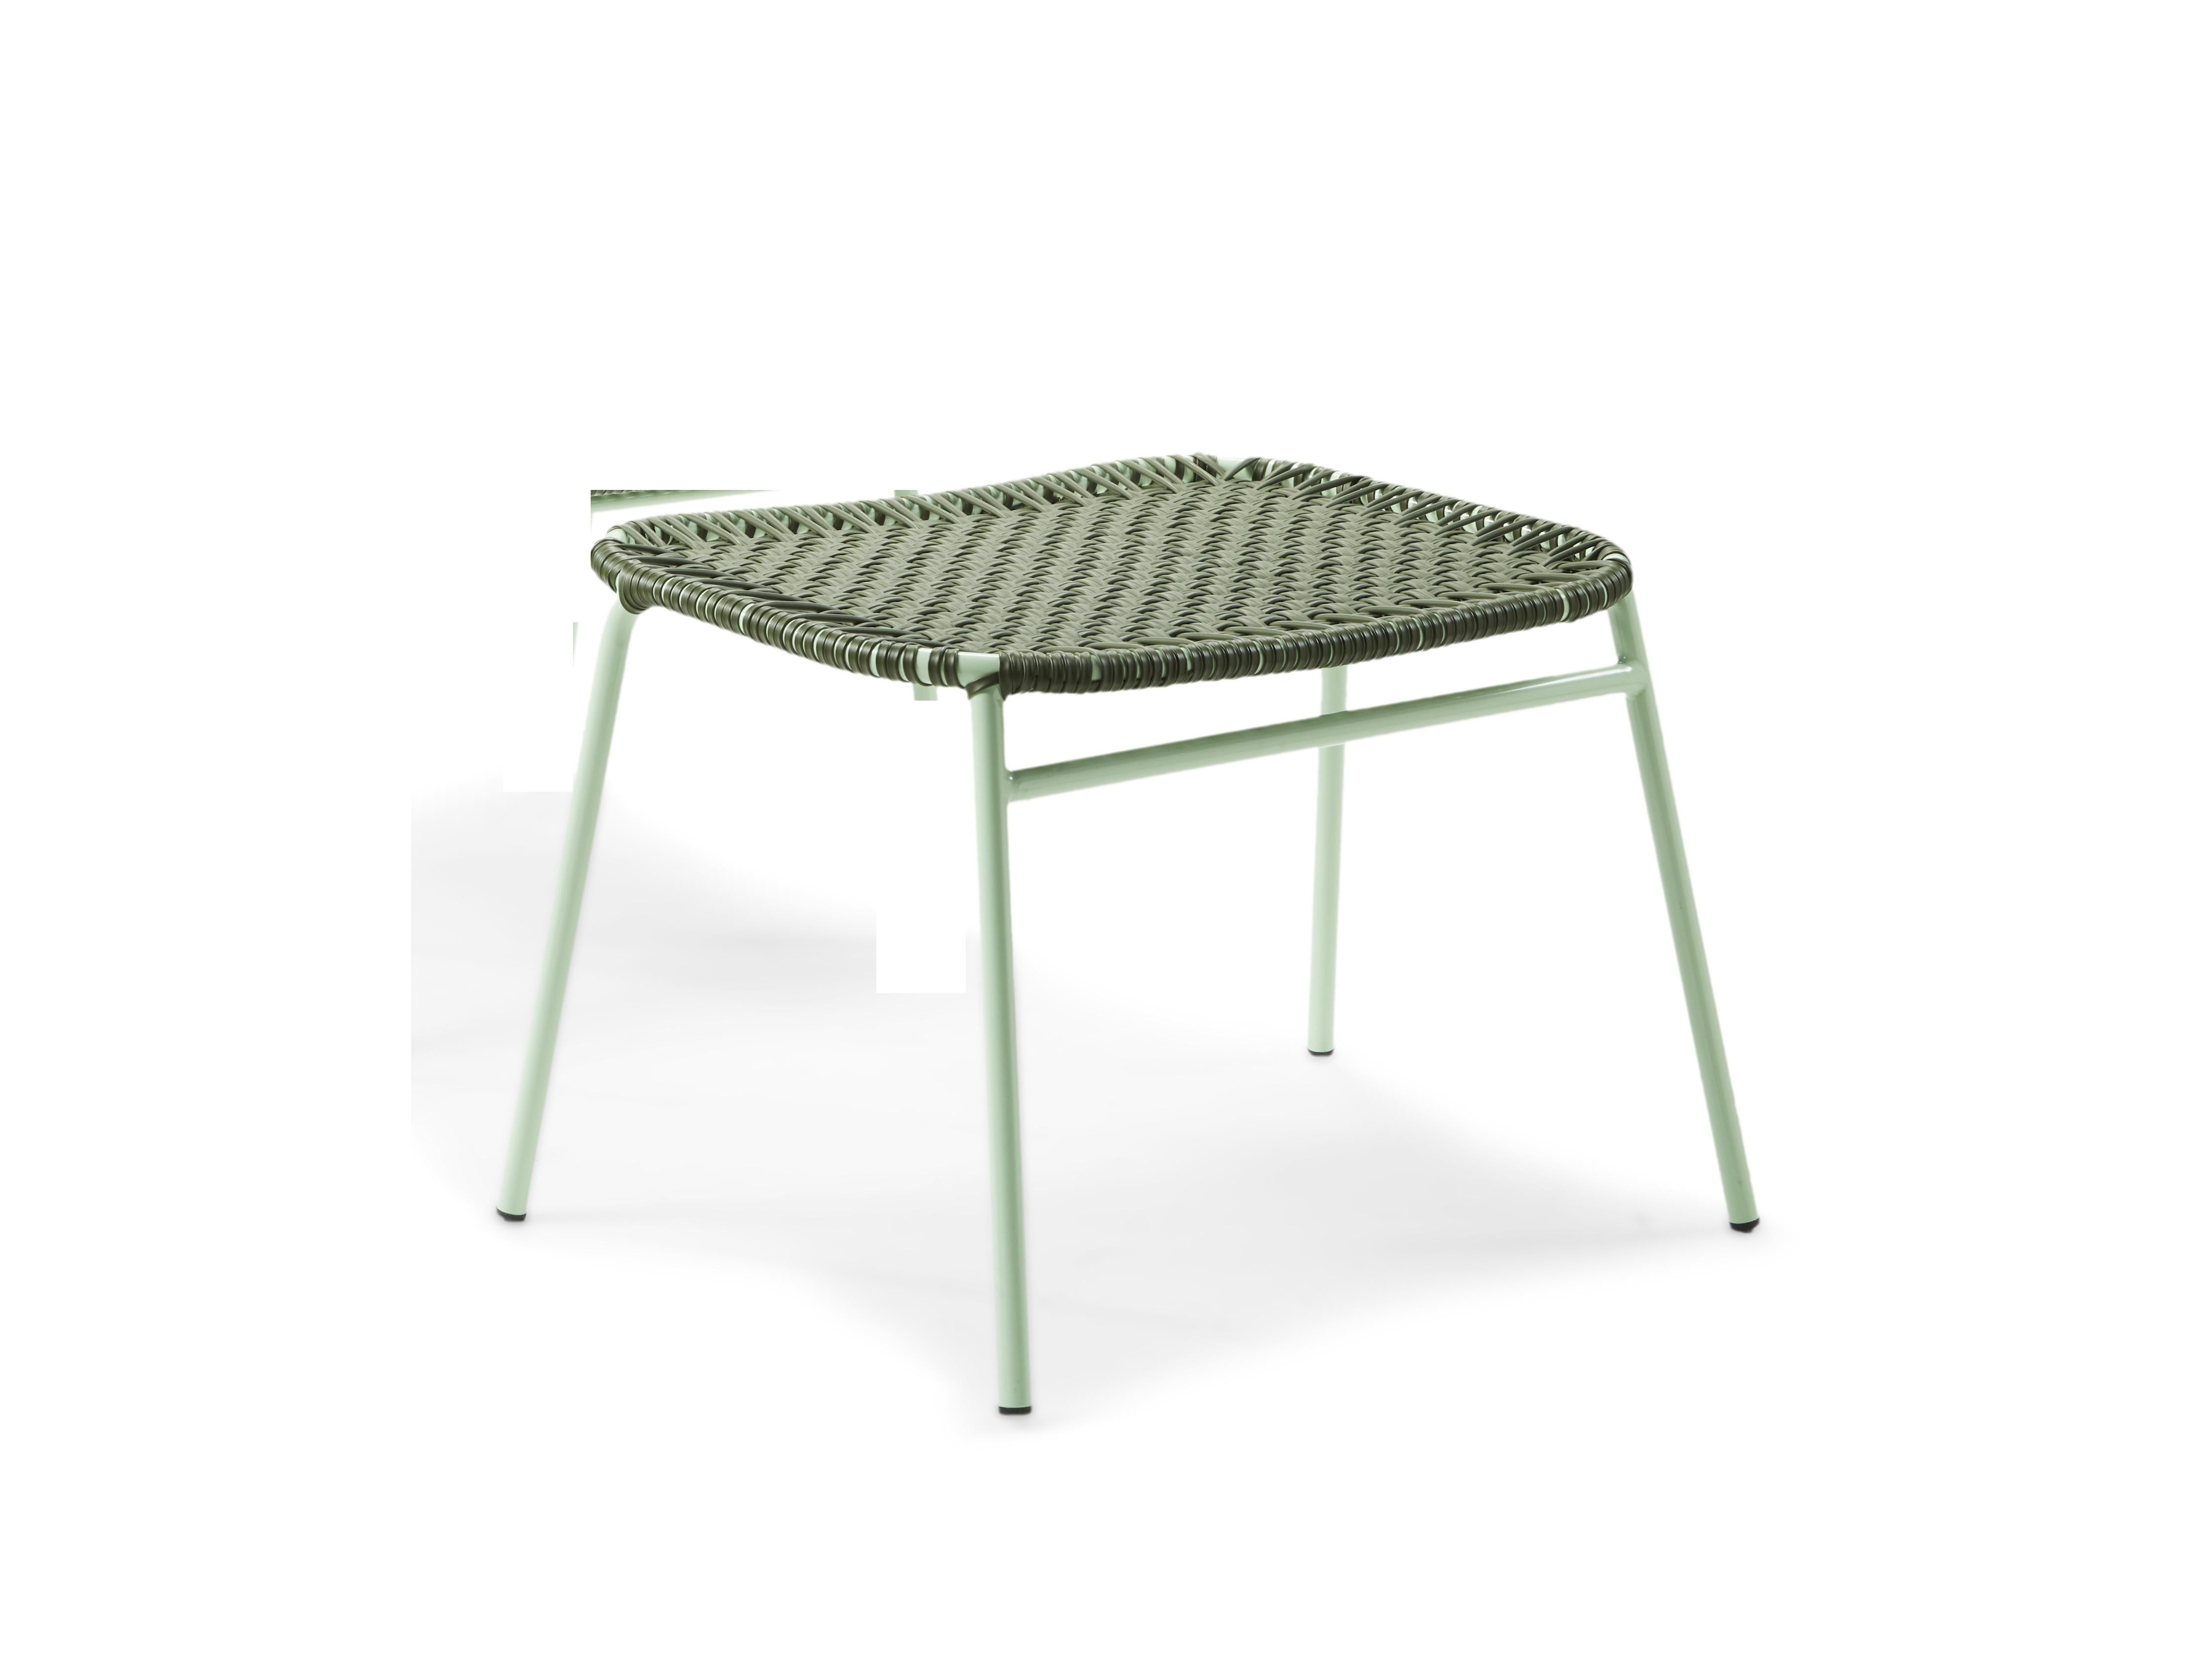 Olive Cielo footstool by Sebastian Herkner
Materials: Galvanized and powder-coated tubular steel. PVC strings are made from recycled plastic.
Technique: Made from recycled plastic and weaved by local craftspeople in Cartagena, Colombia.